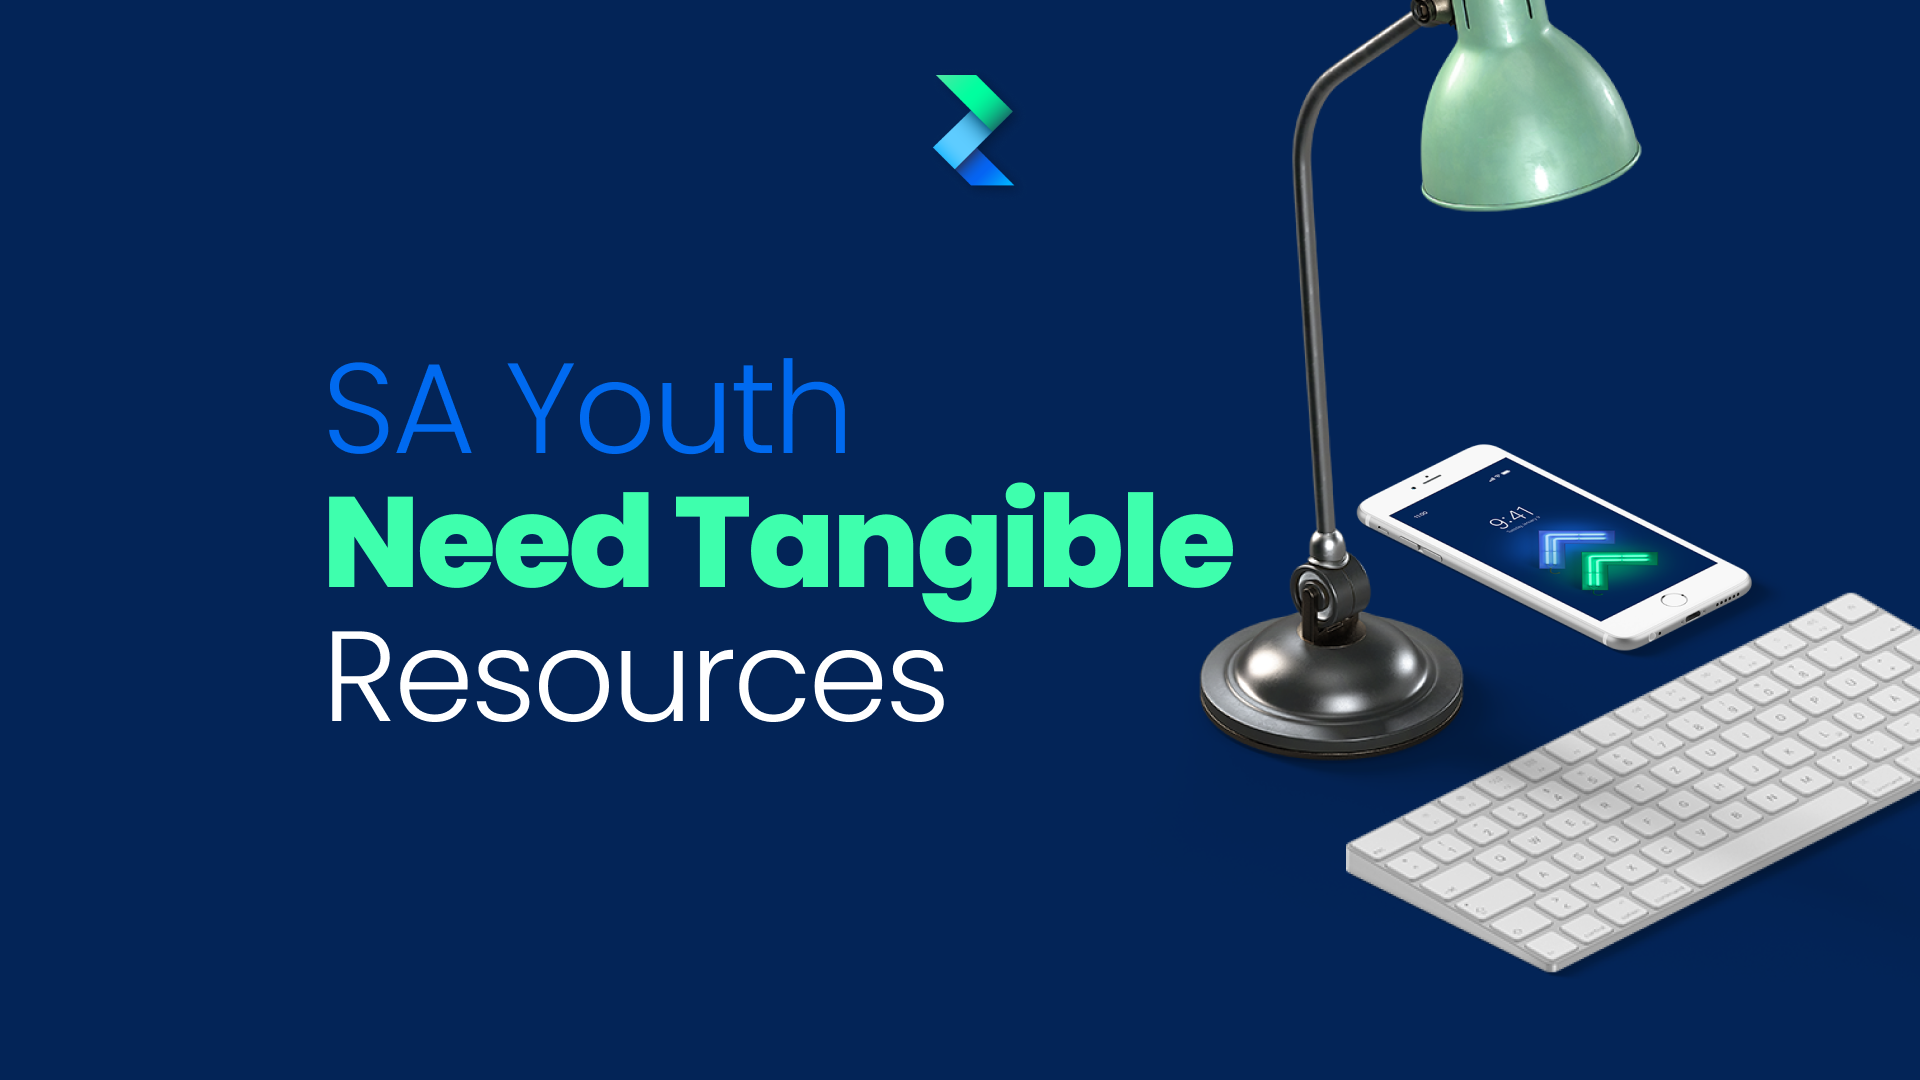 Youth Month: The South African Youth need tangible resources.